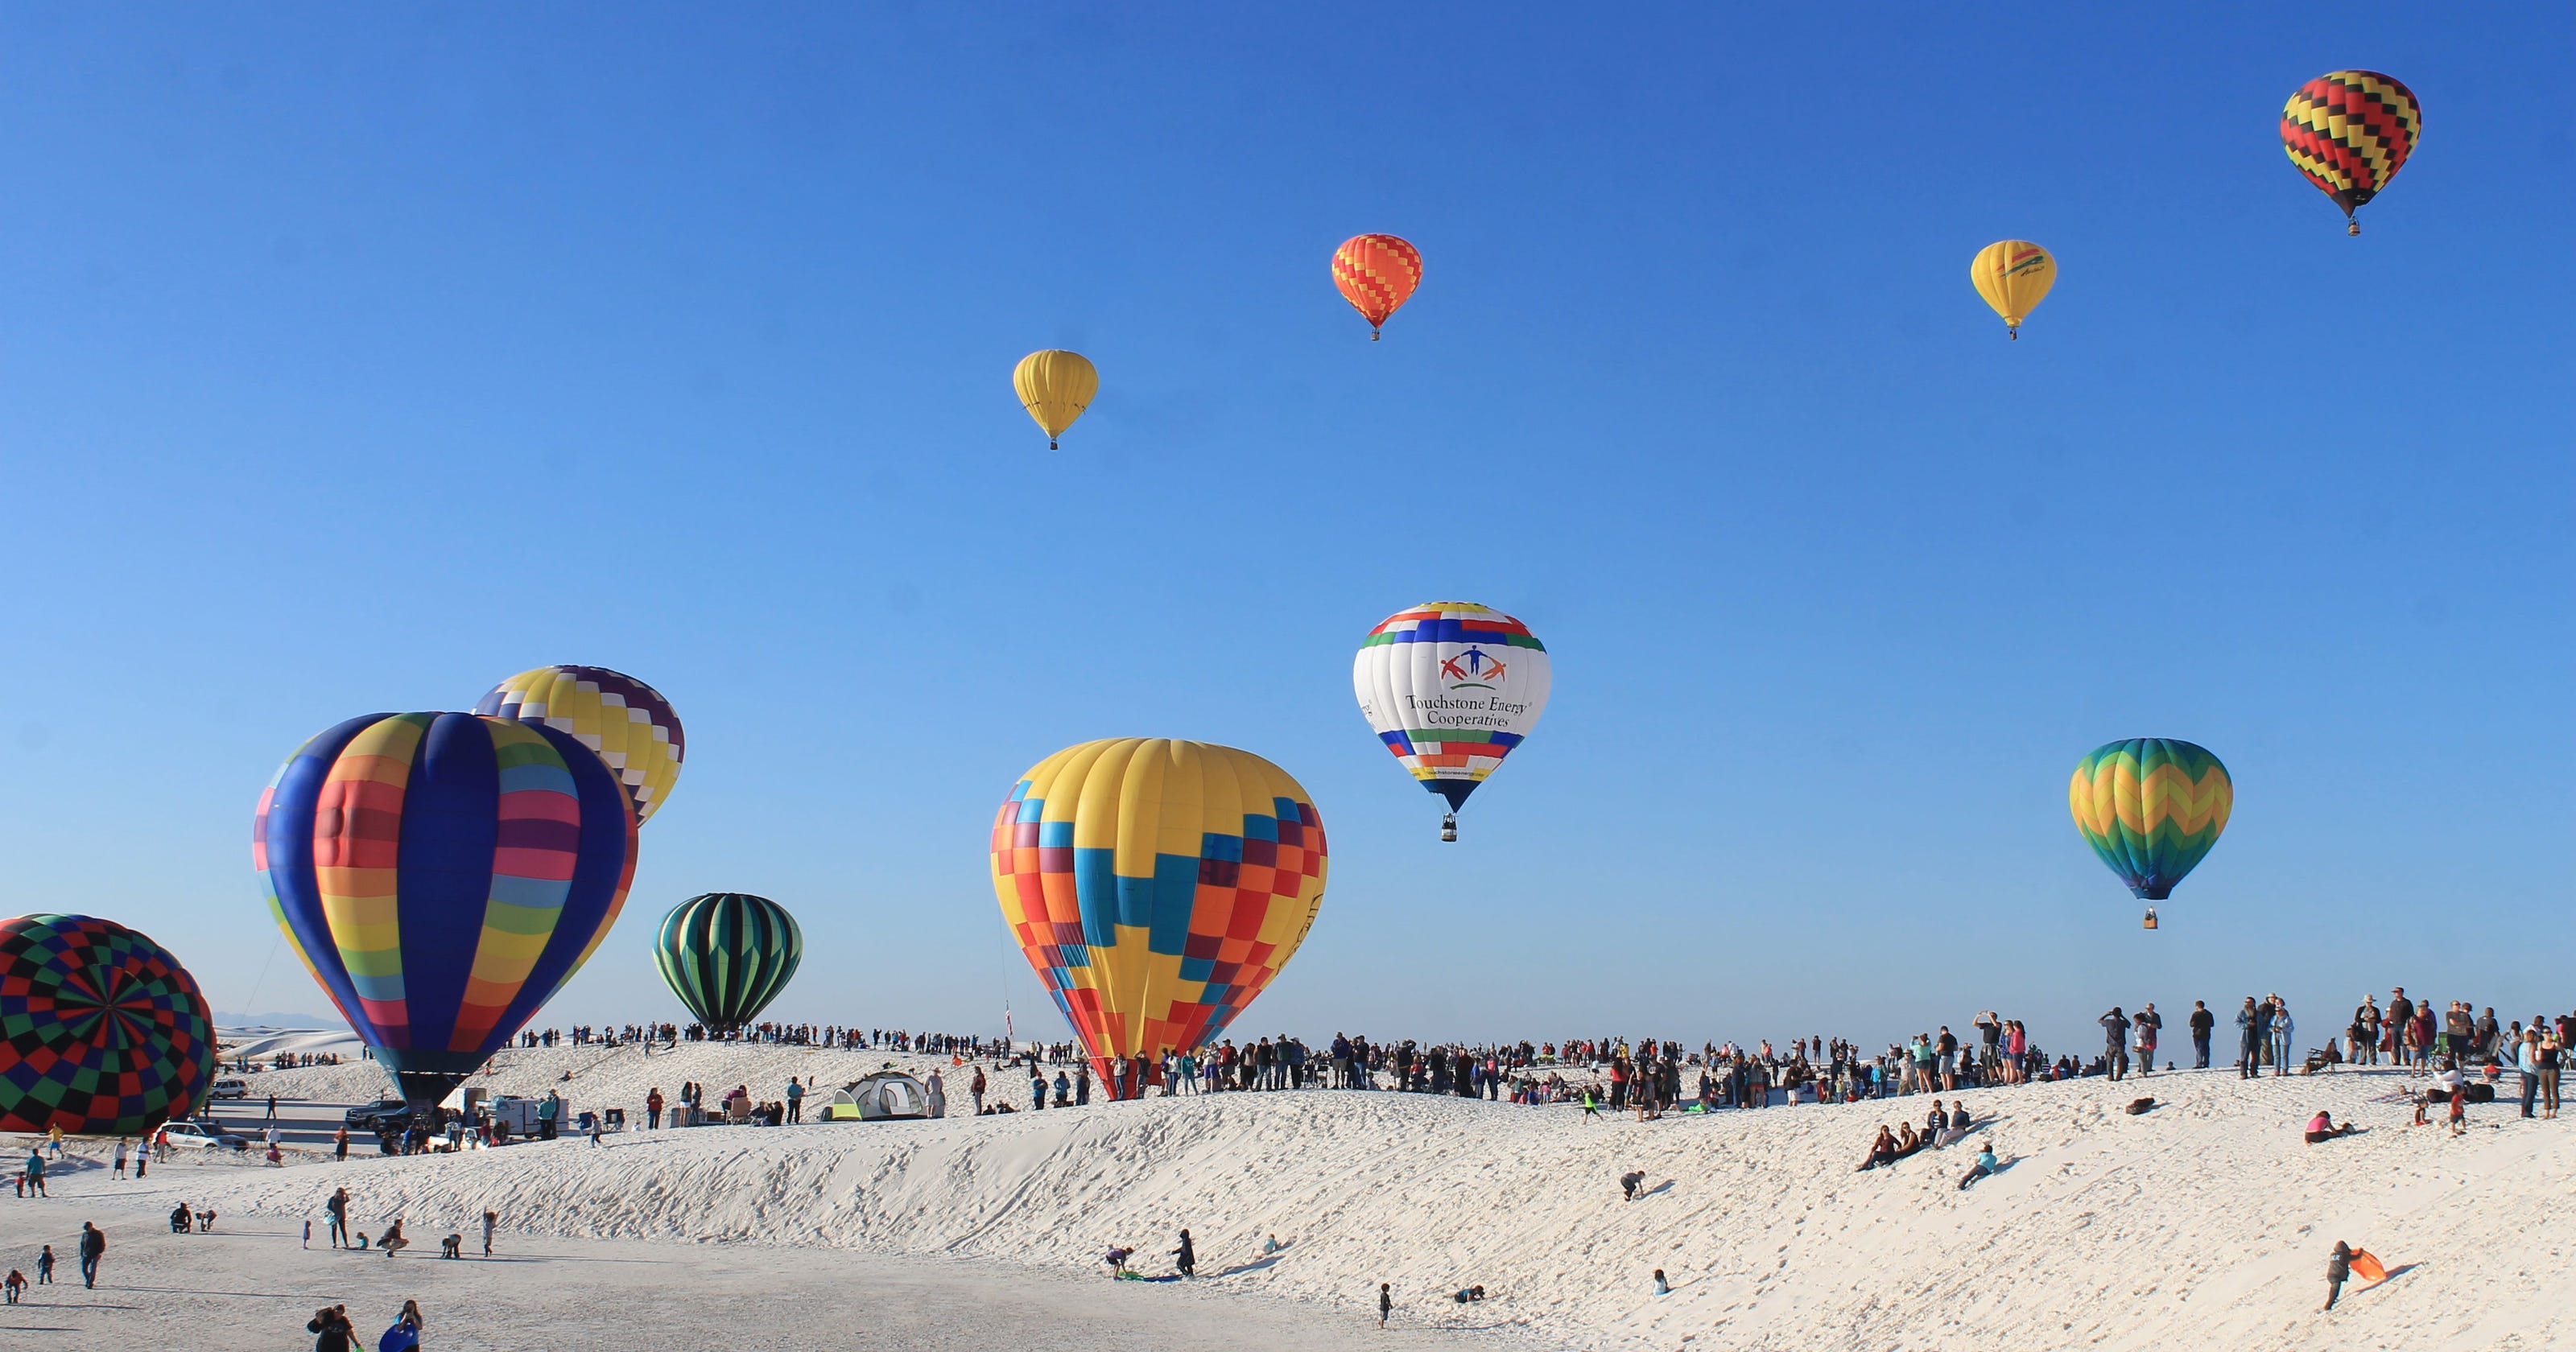 White Sands Balloon Festival to be held Sept. 16 and 17